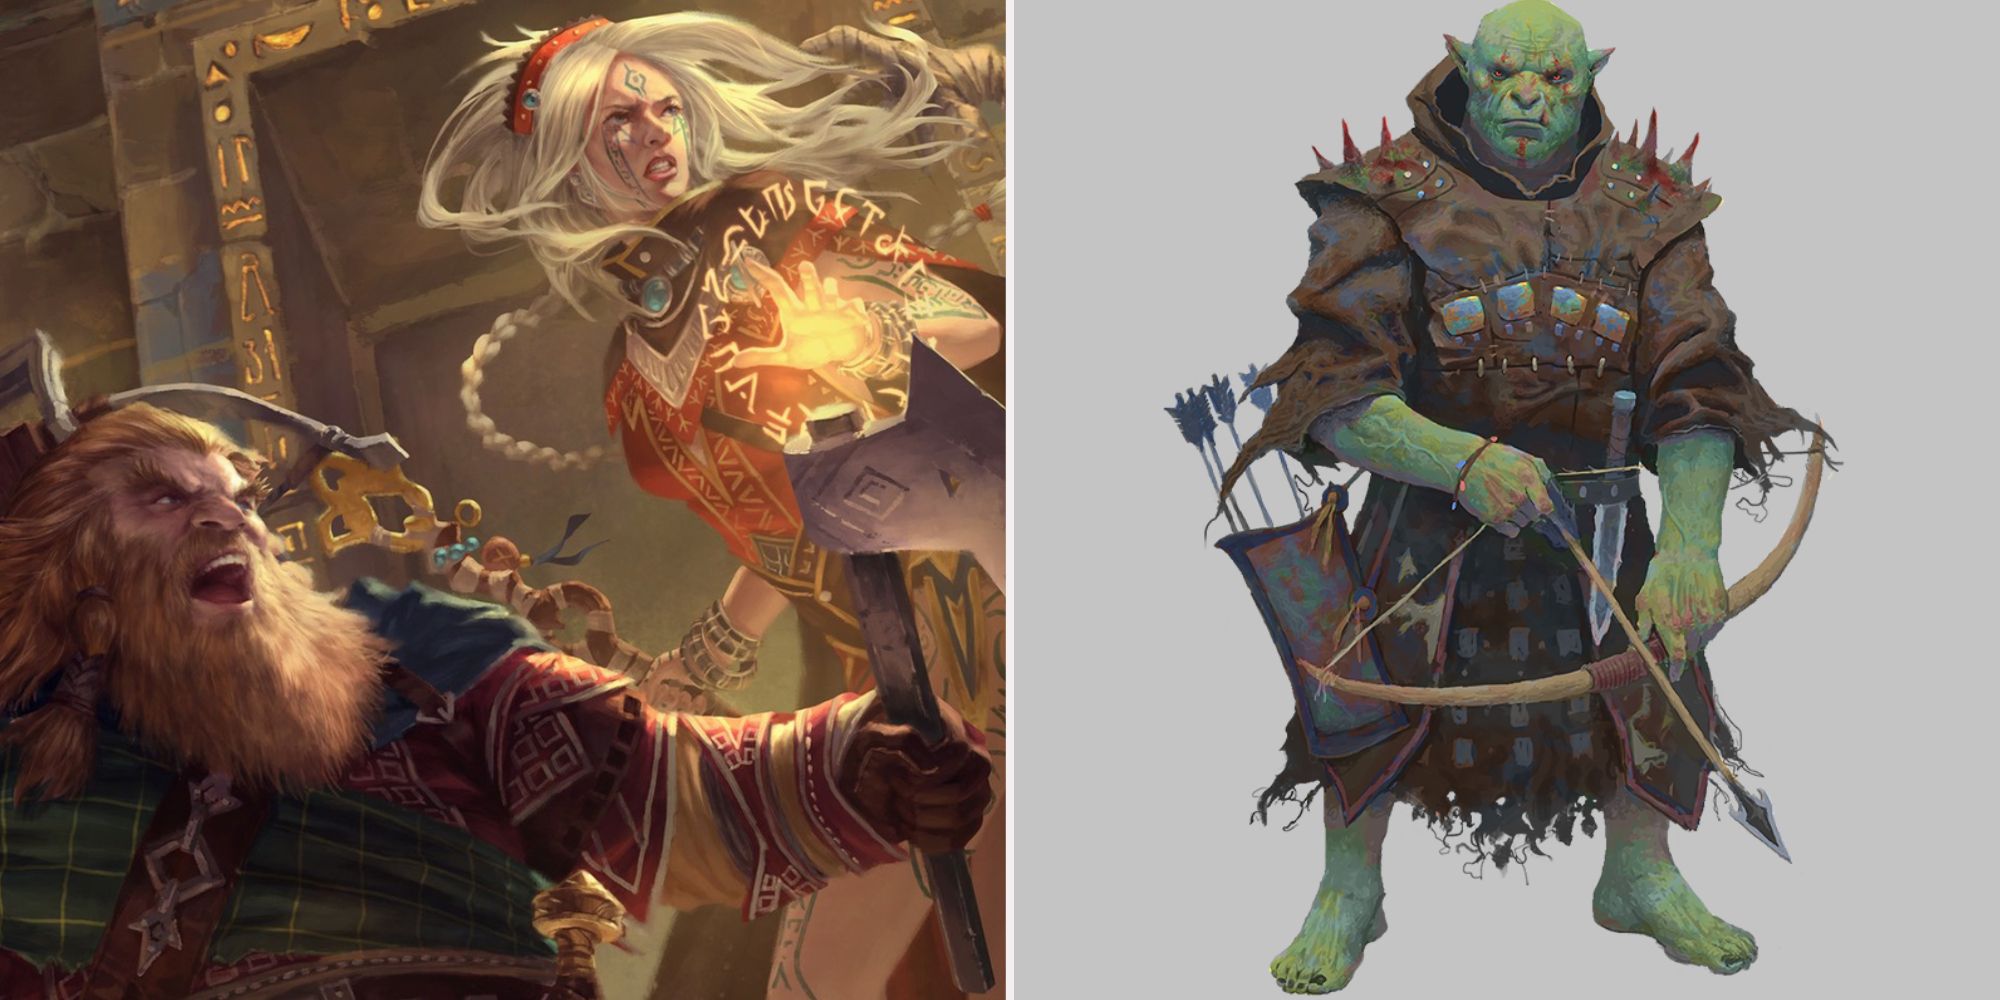 On the left, a picture of two adventures being attacked, while on the right is a picture of an orc ranger.